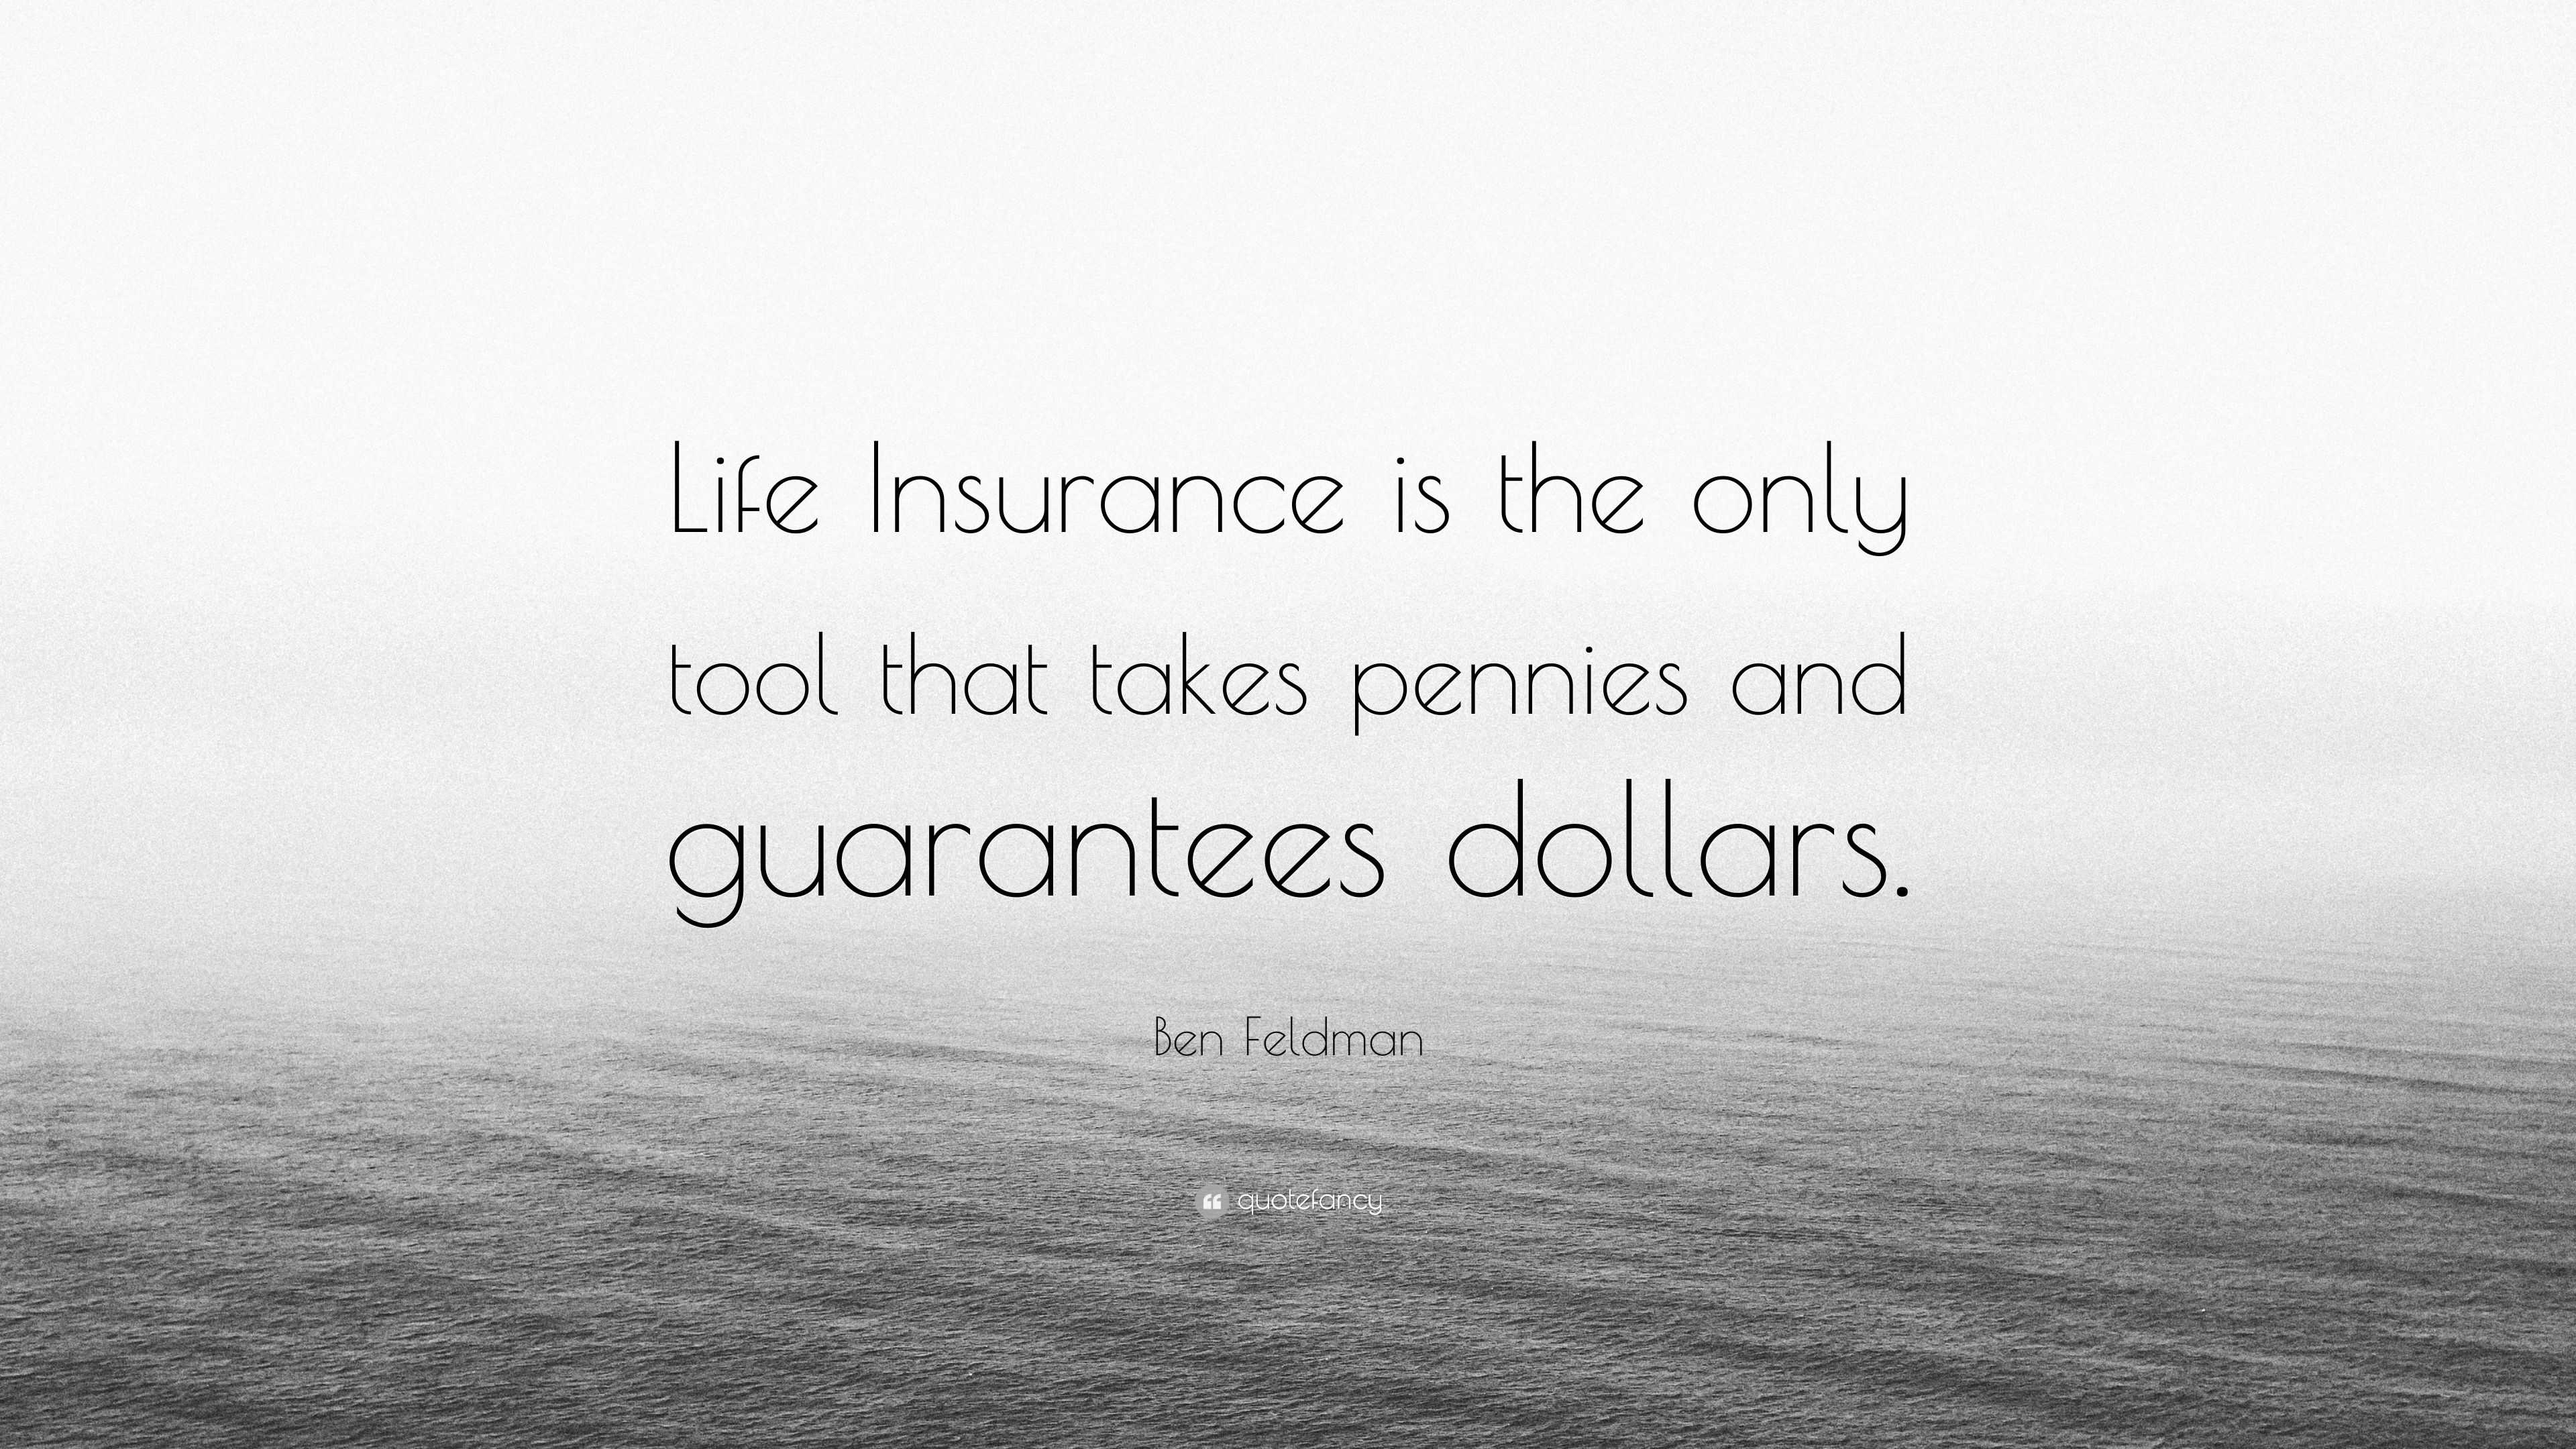 ben-feldman-quote-life-insurance-is-the-only-tool-that-takes-pennies